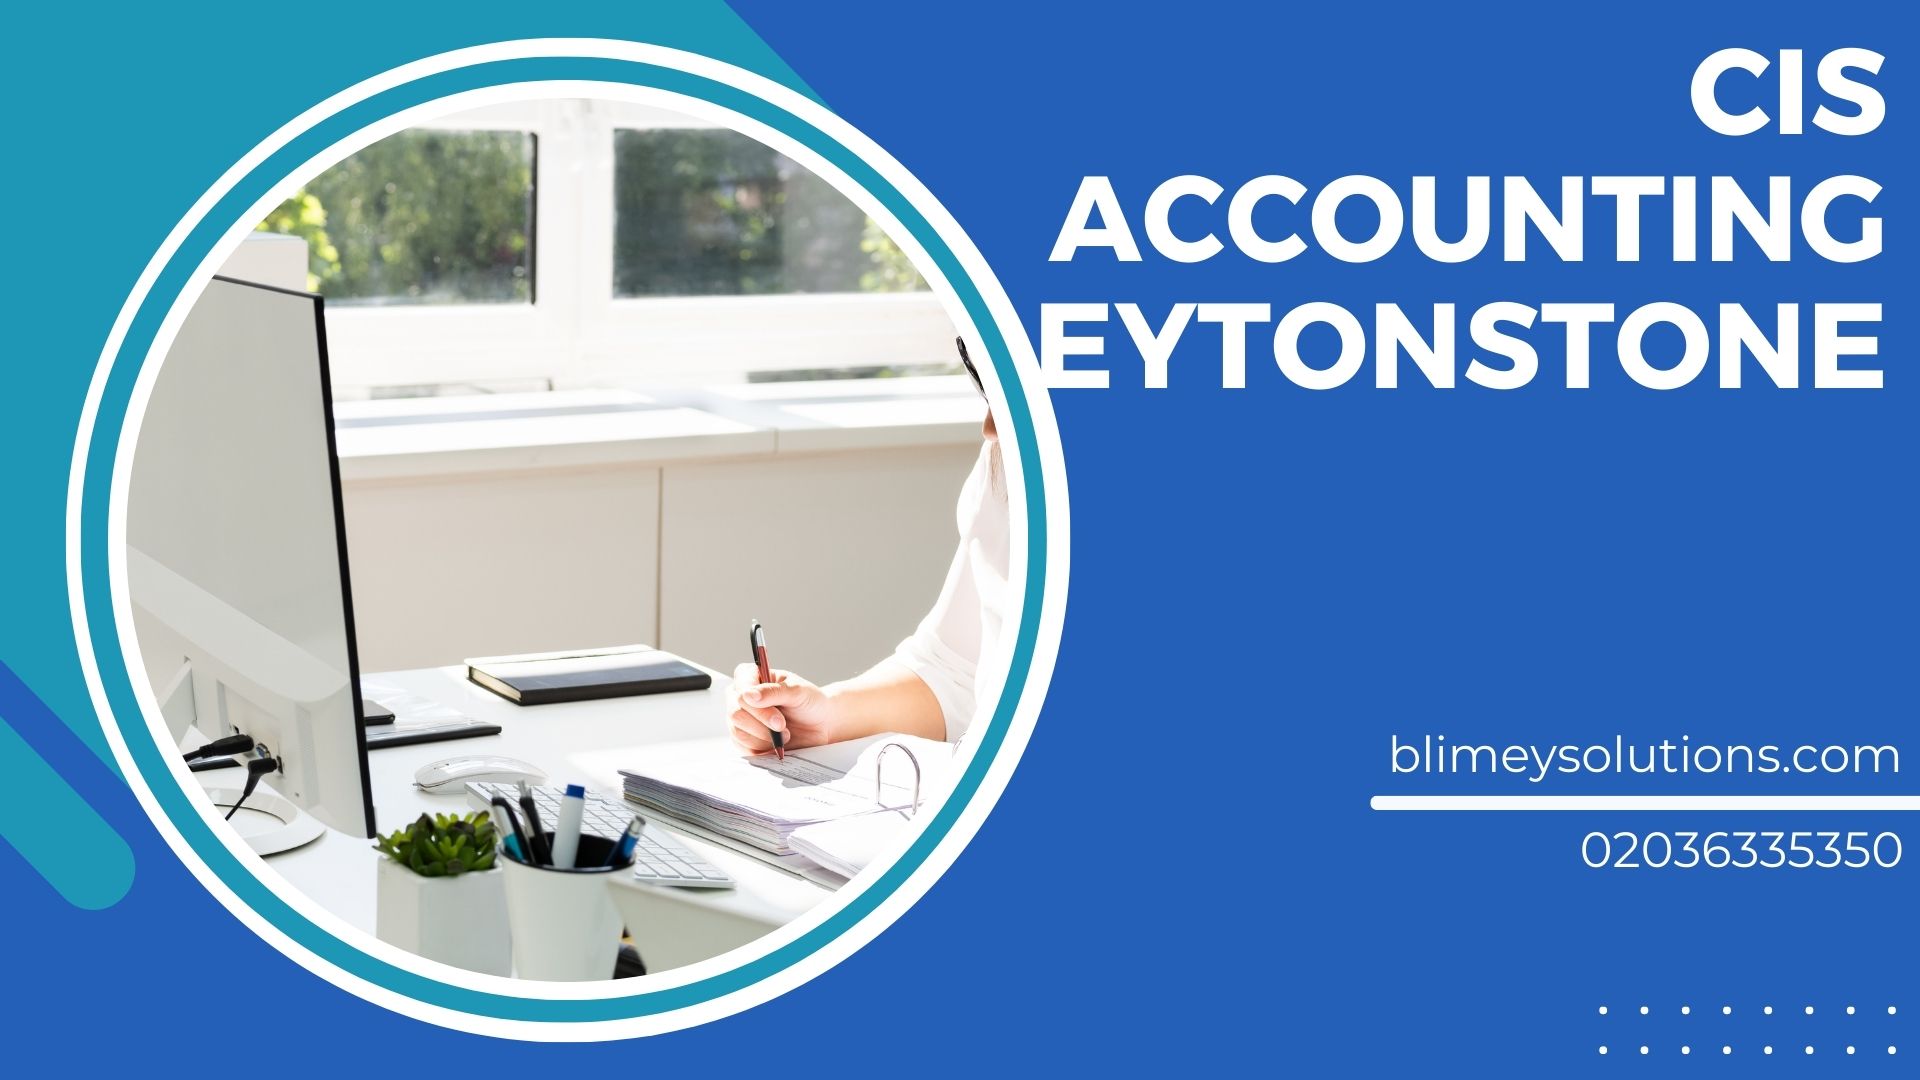 CIS Accounting in Leytonstone E11 London